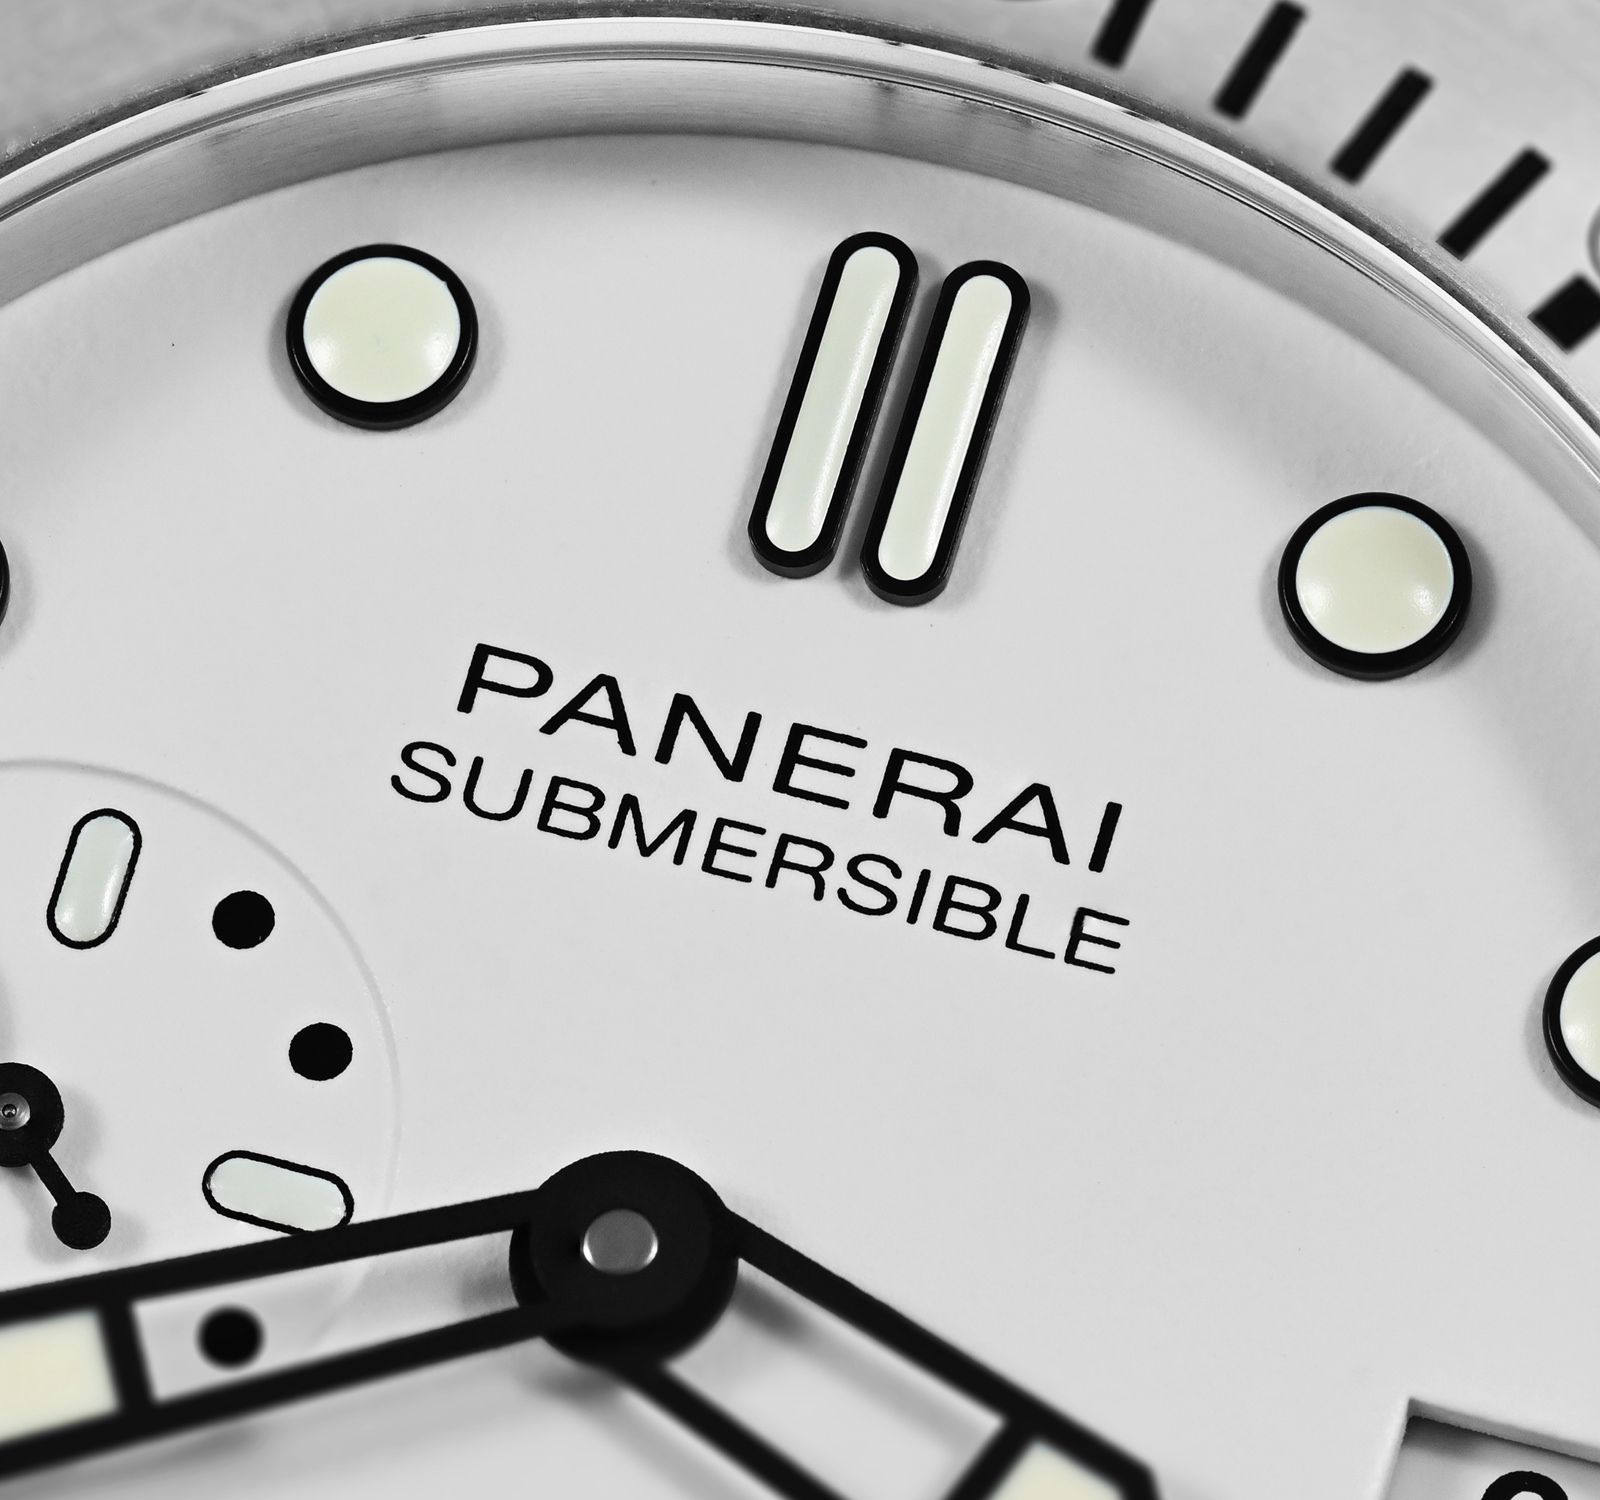 Submersible PAM01223